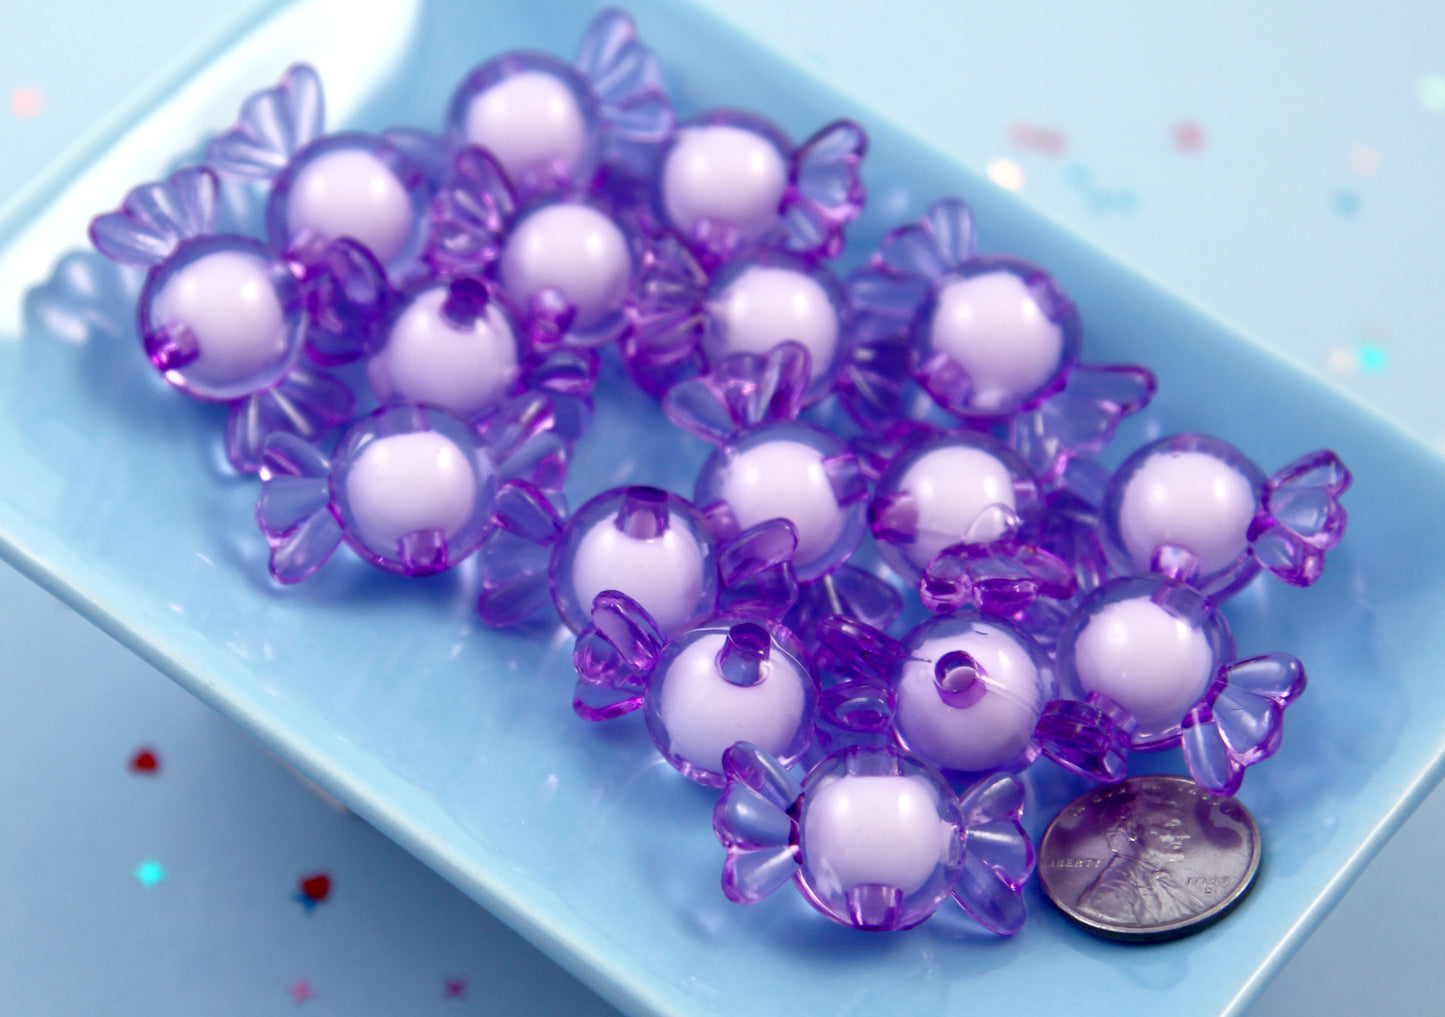 Candy Beads - Puple - 30mm Big Pastel Candies Wrapped Candy Shape Acrylic or Resin Beads - 20 pc set